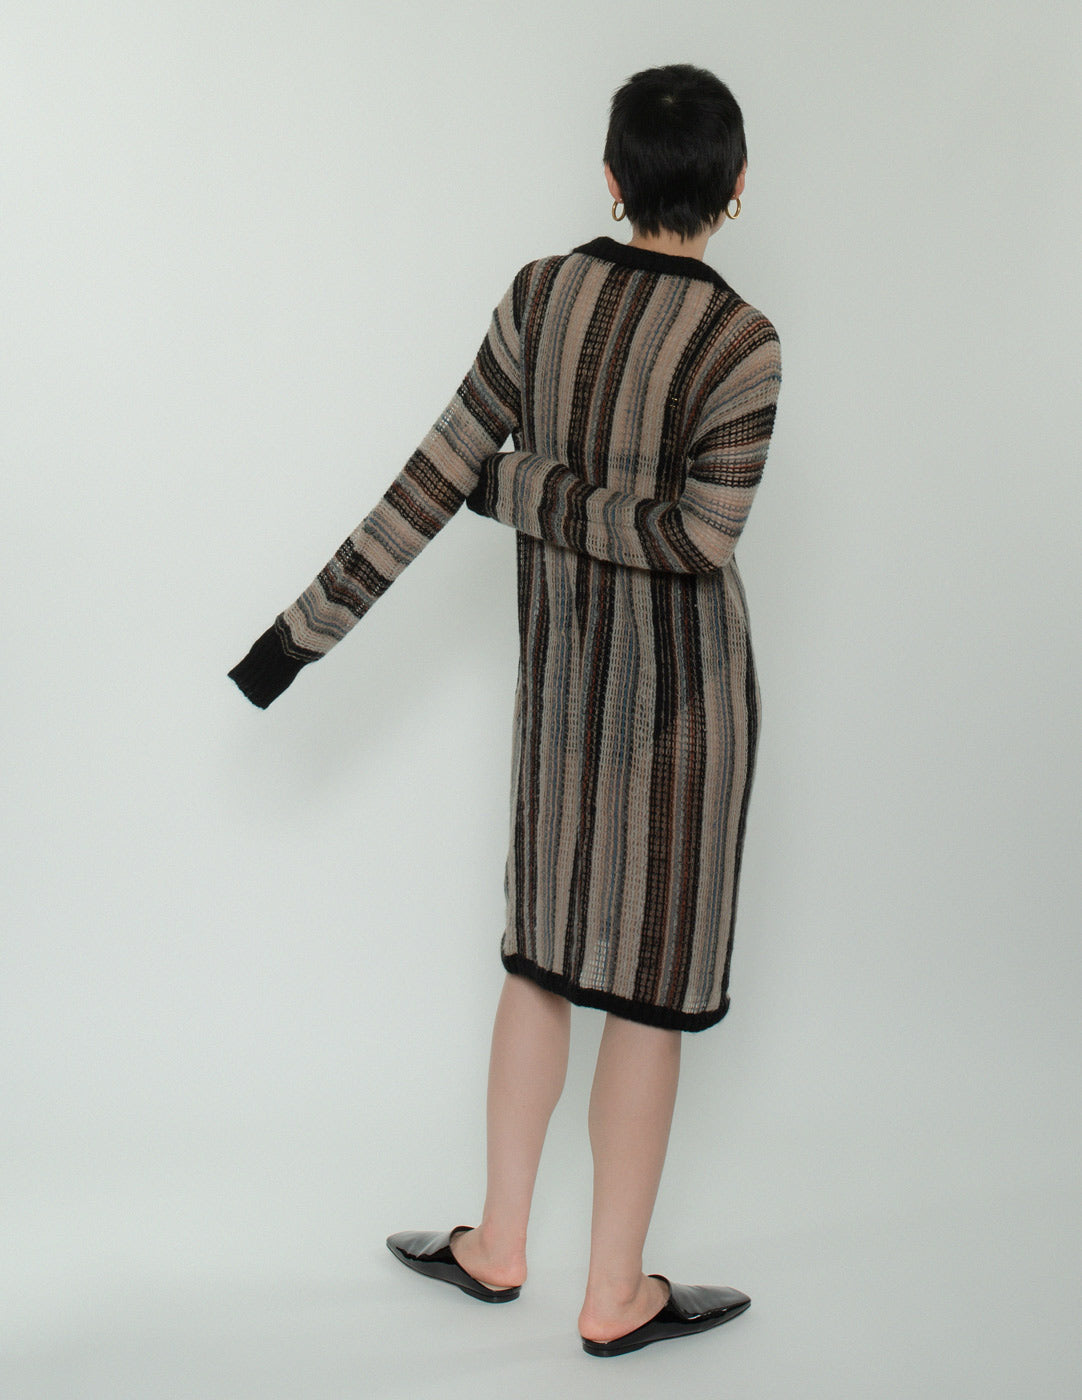 Missoni vintage wool and mohair crochet dress back view